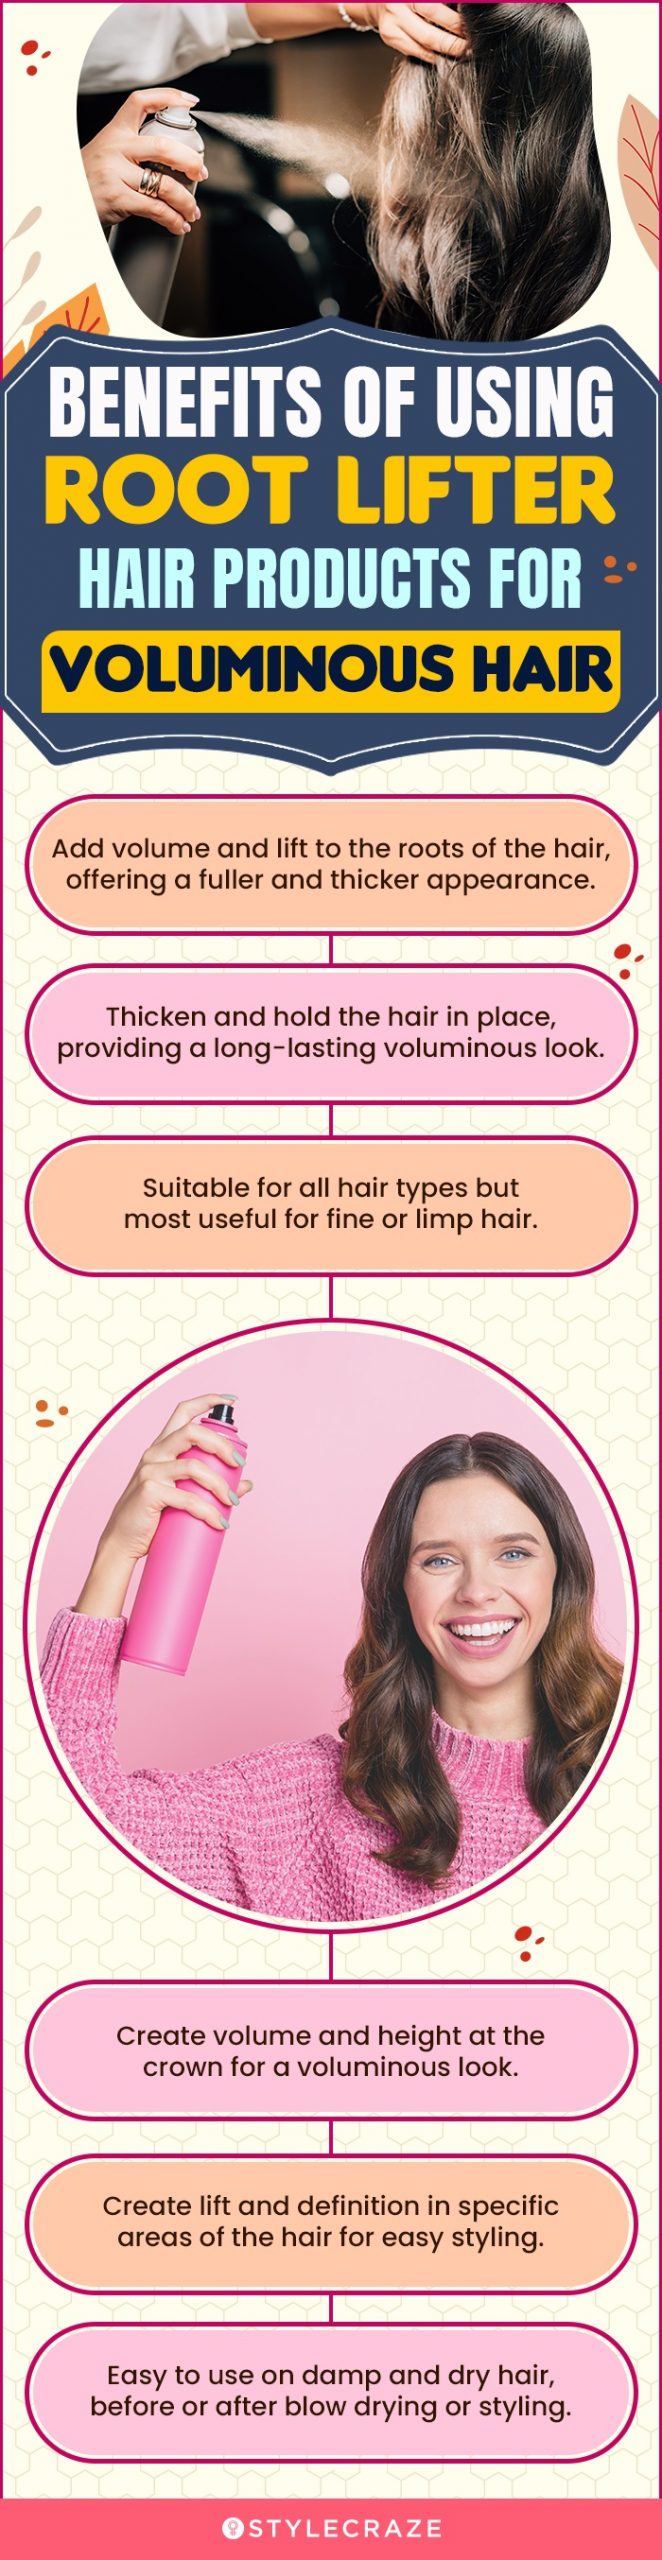 Benefits Of Using Root Lifter Hair Products For Voluminous Hair (infographic)